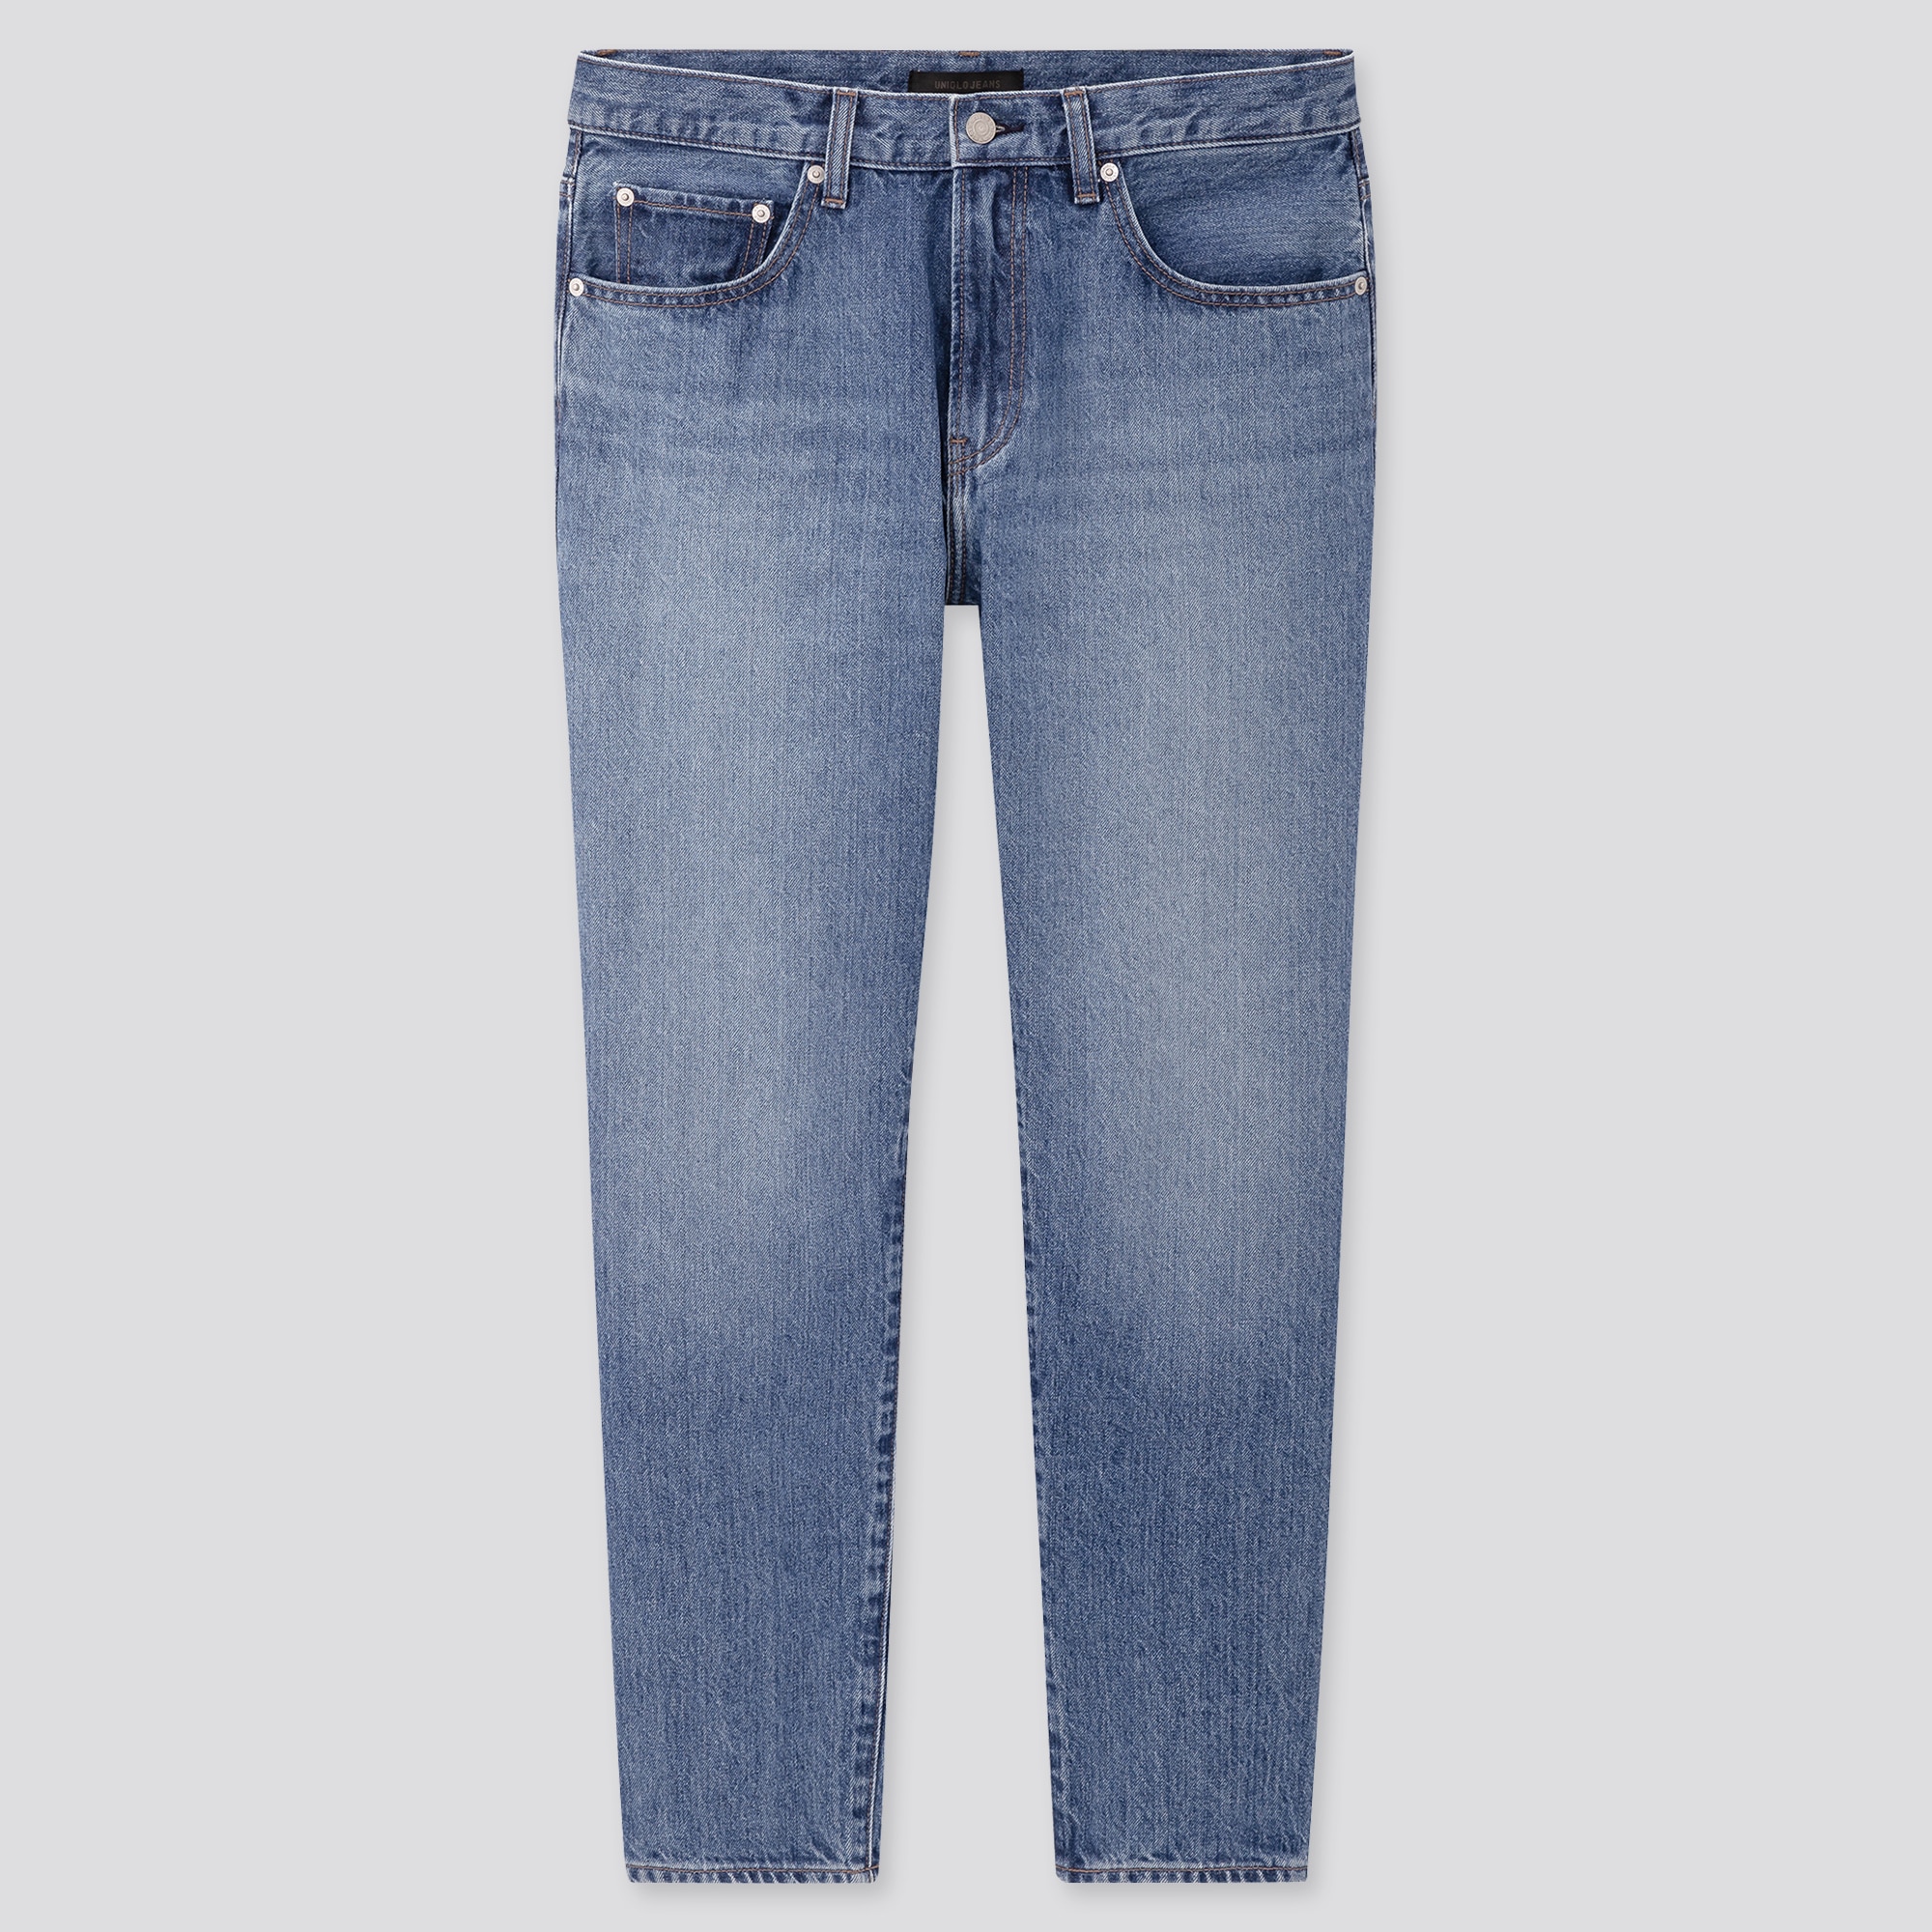 uniqlo regular fit jeans review